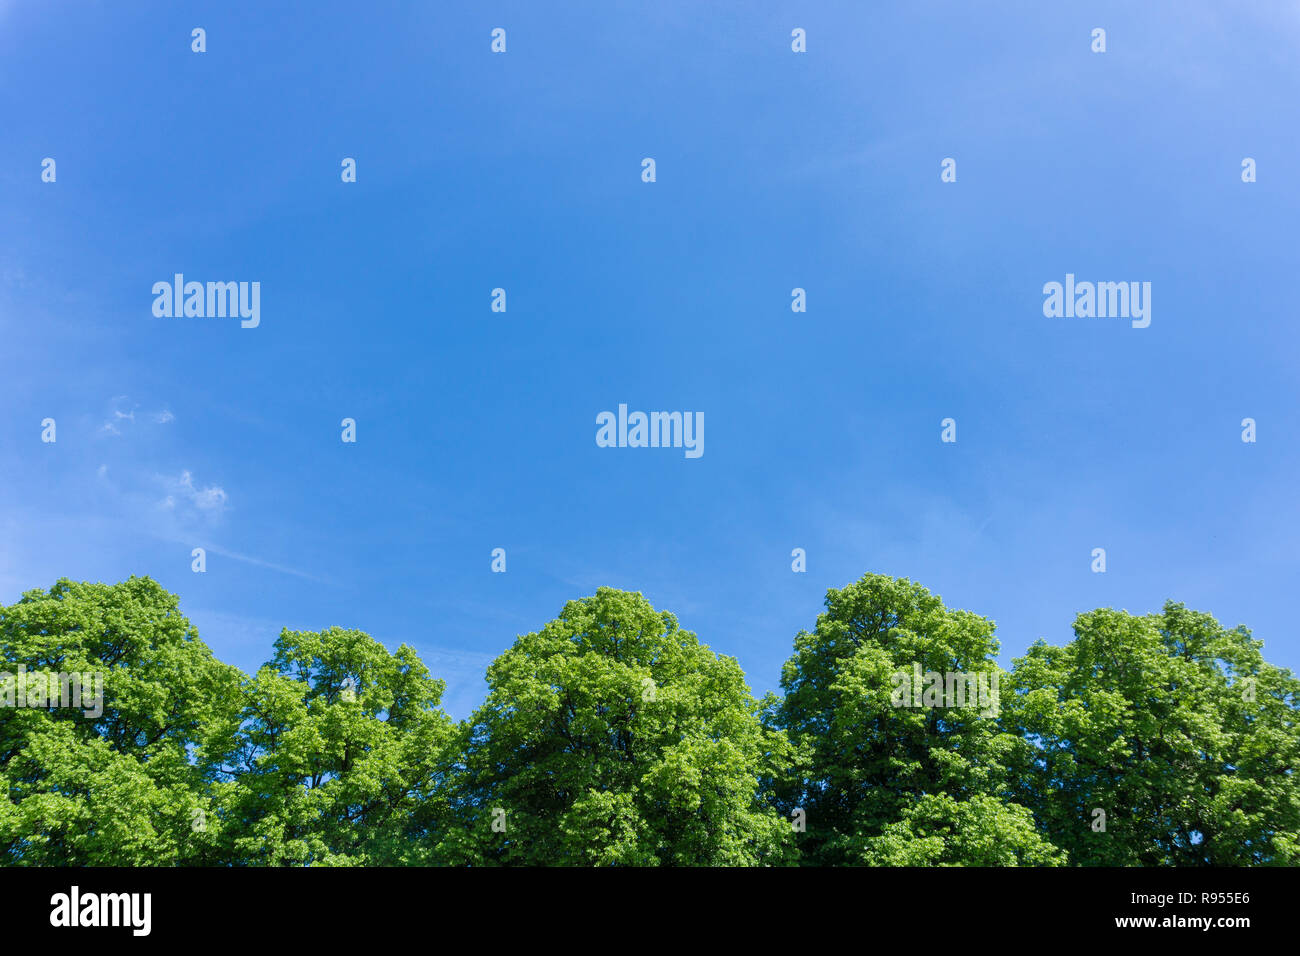 View of Big Trees with green Tree Tops in front of a cloudy blue Sky. Stock Photo